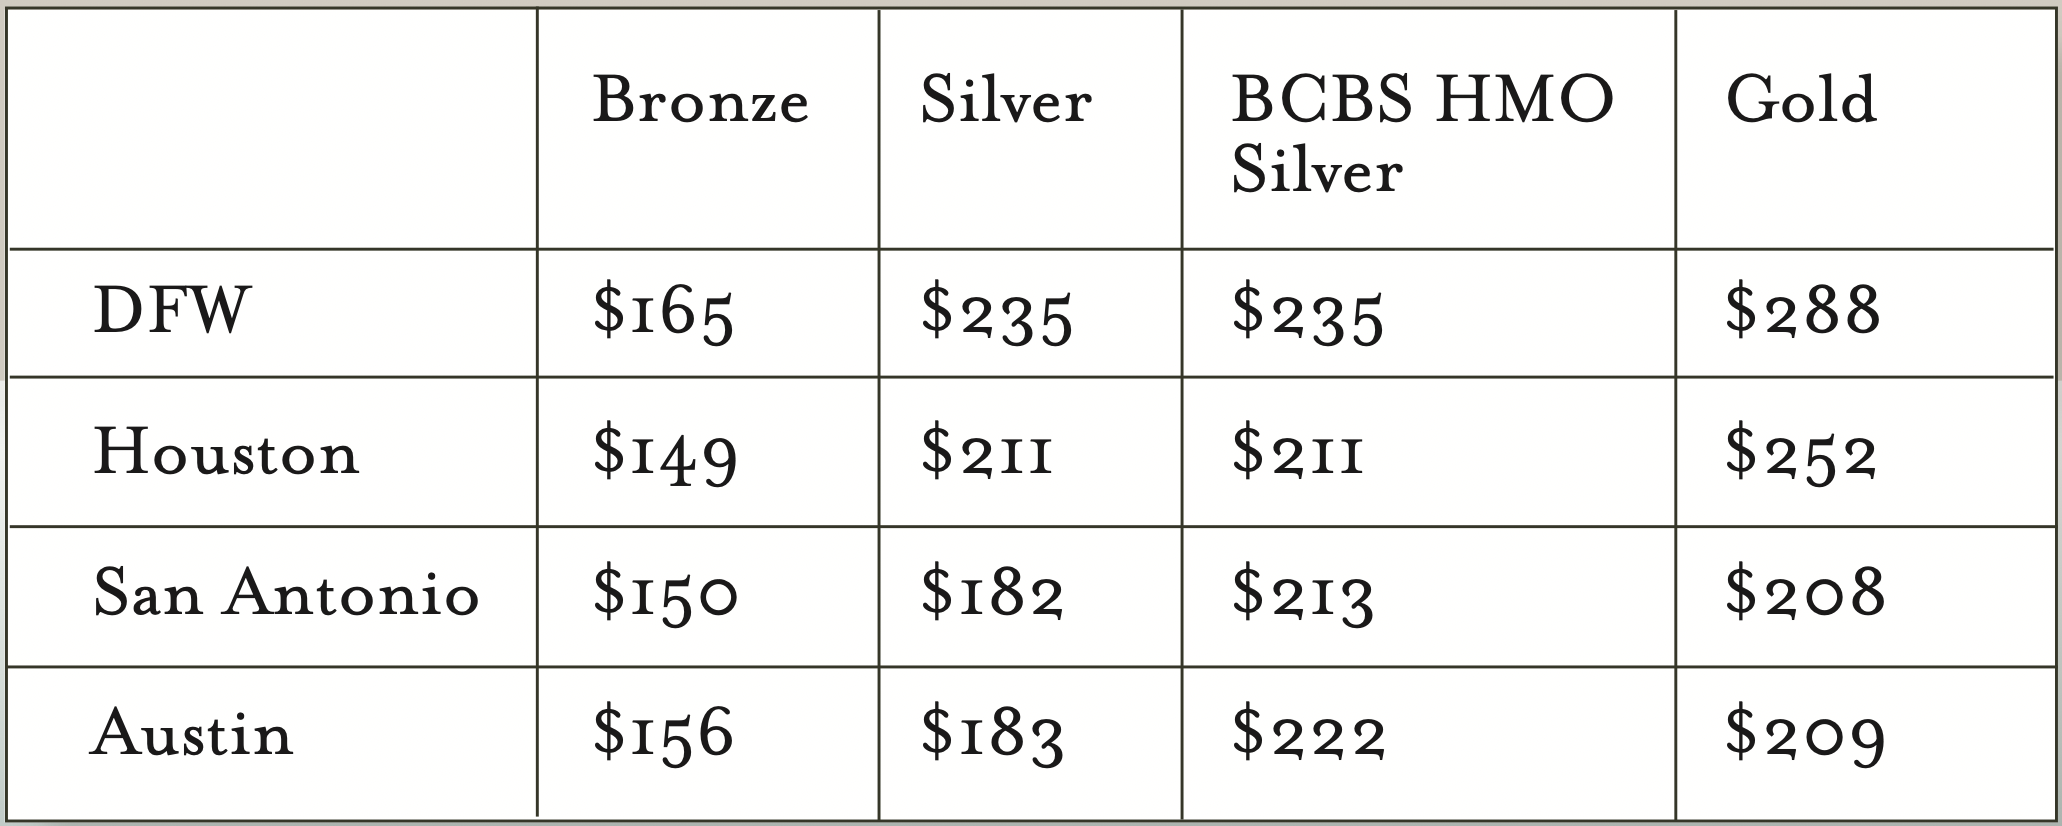 This table compares the lowest-priced premiums for a 30-year old by plan type and city.